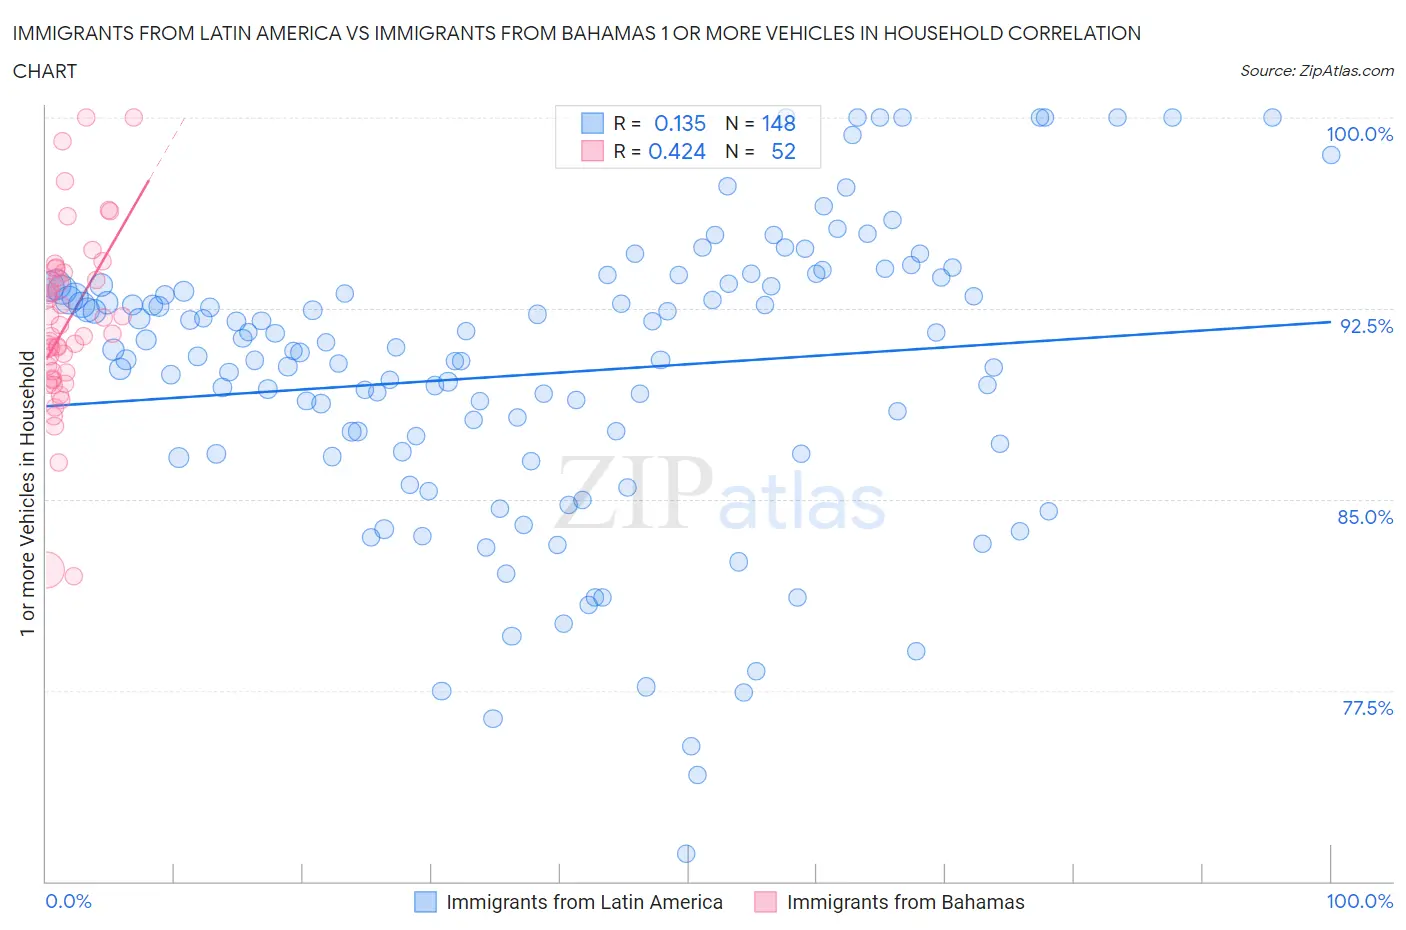 Immigrants from Latin America vs Immigrants from Bahamas 1 or more Vehicles in Household